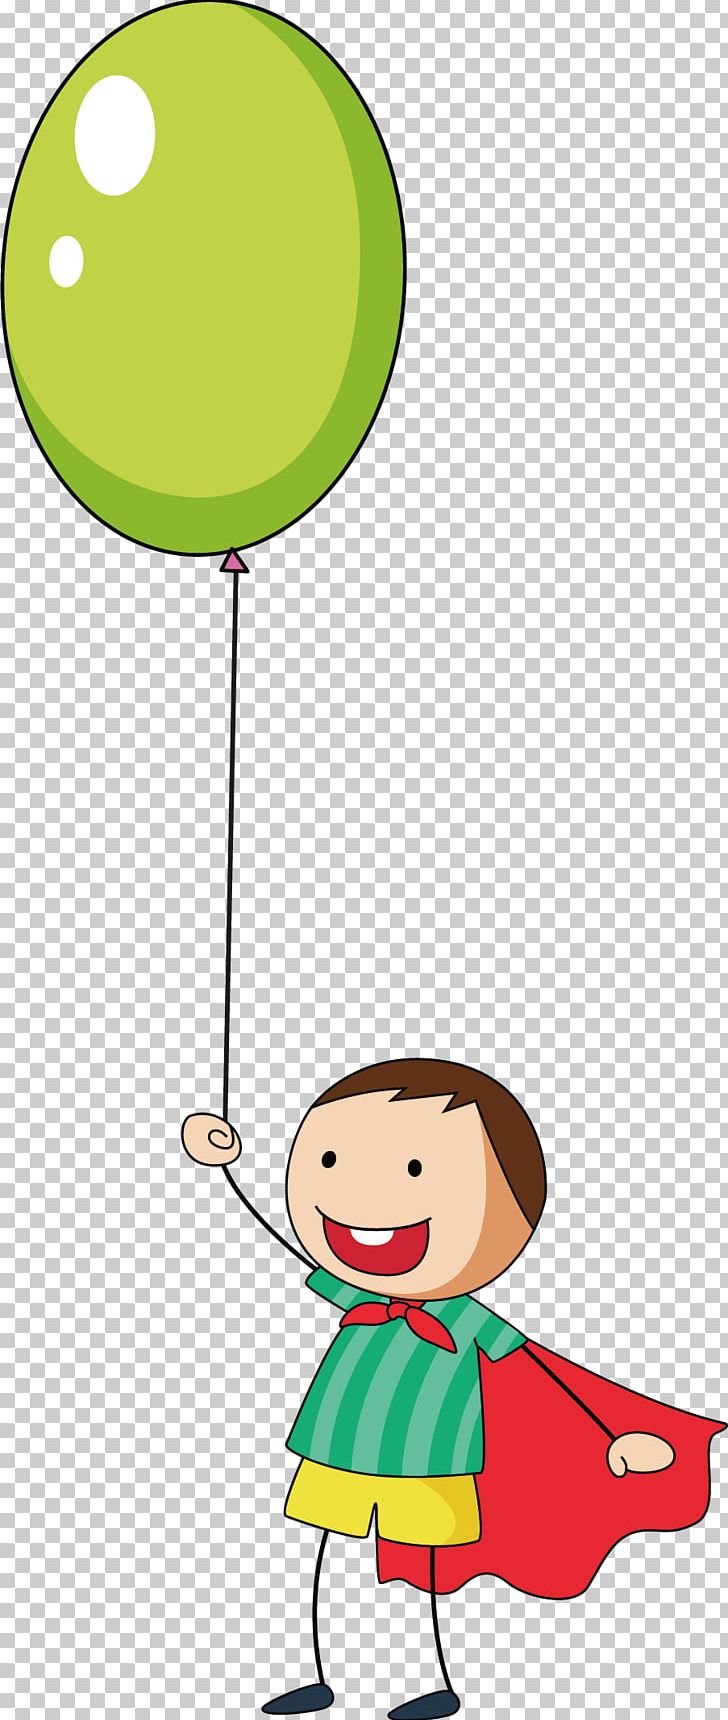 Child All Ordinaries Drawing Australian Securities Exchange PNG, Clipart, Baby Toys, Balloon, Boy, Boy Vector, Cartoon Free PNG Download